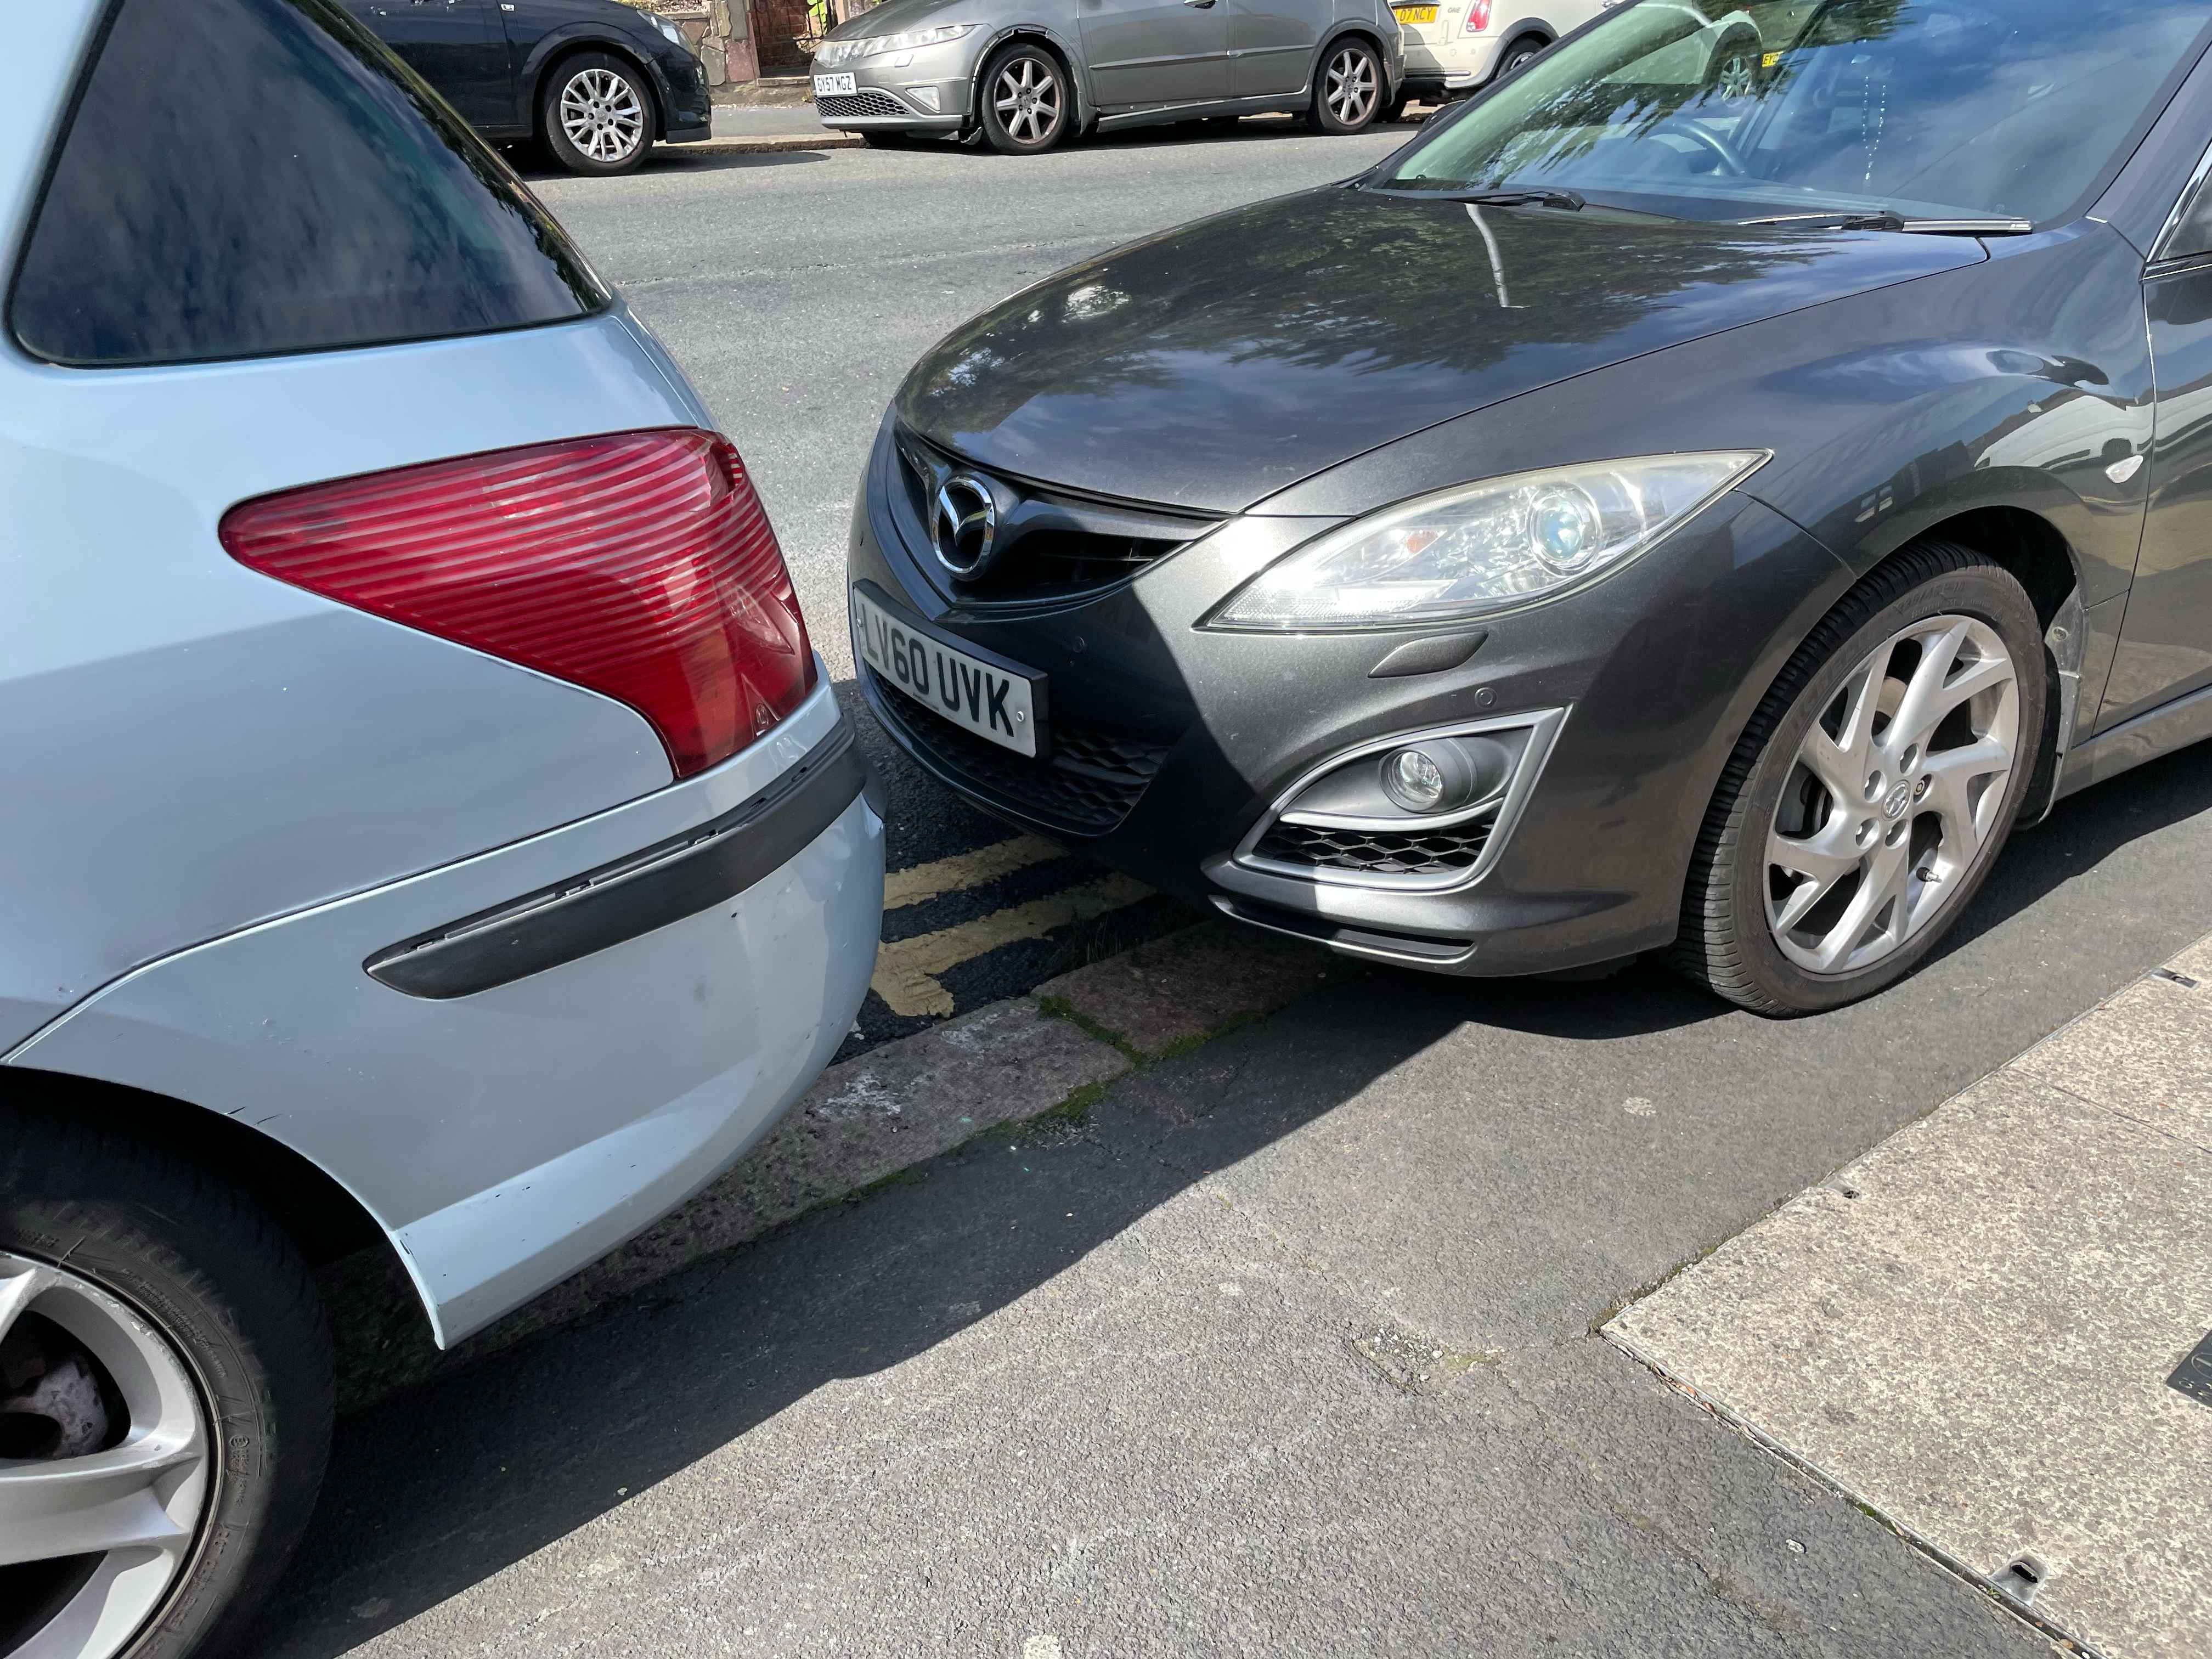 Photograph of LV60 UVK - a Grey Mazda 6 parked in Hollingdean by a non-resident. The second of four photographs supplied by the residents of Hollingdean.